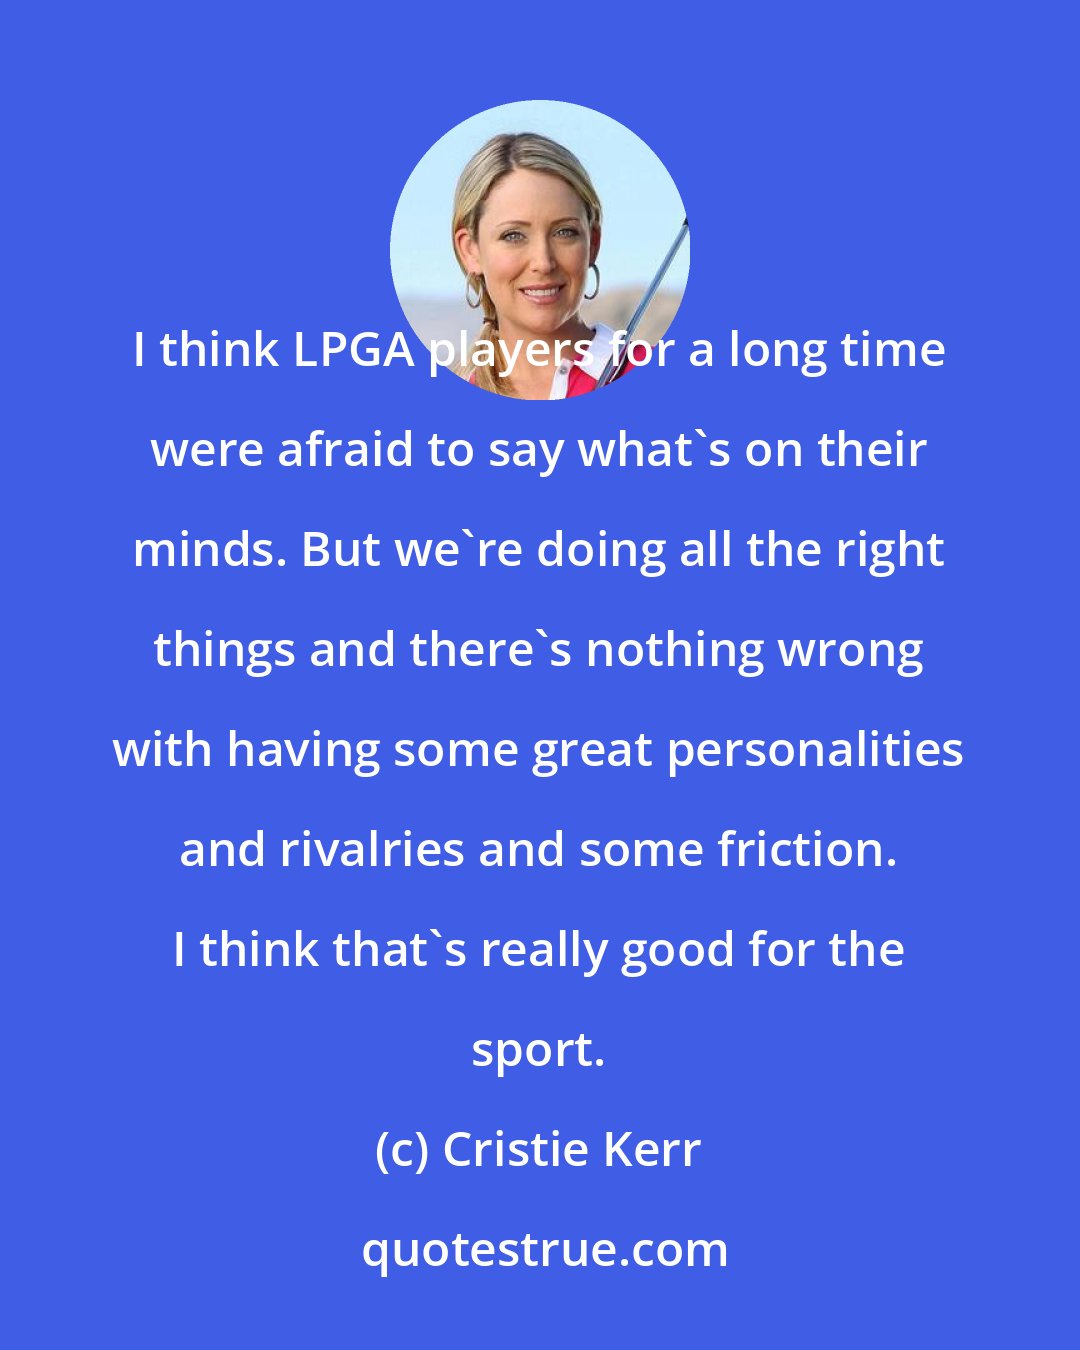 Cristie Kerr: I think LPGA players for a long time were afraid to say what's on their minds. But we're doing all the right things and there's nothing wrong with having some great personalities and rivalries and some friction. I think that's really good for the sport.